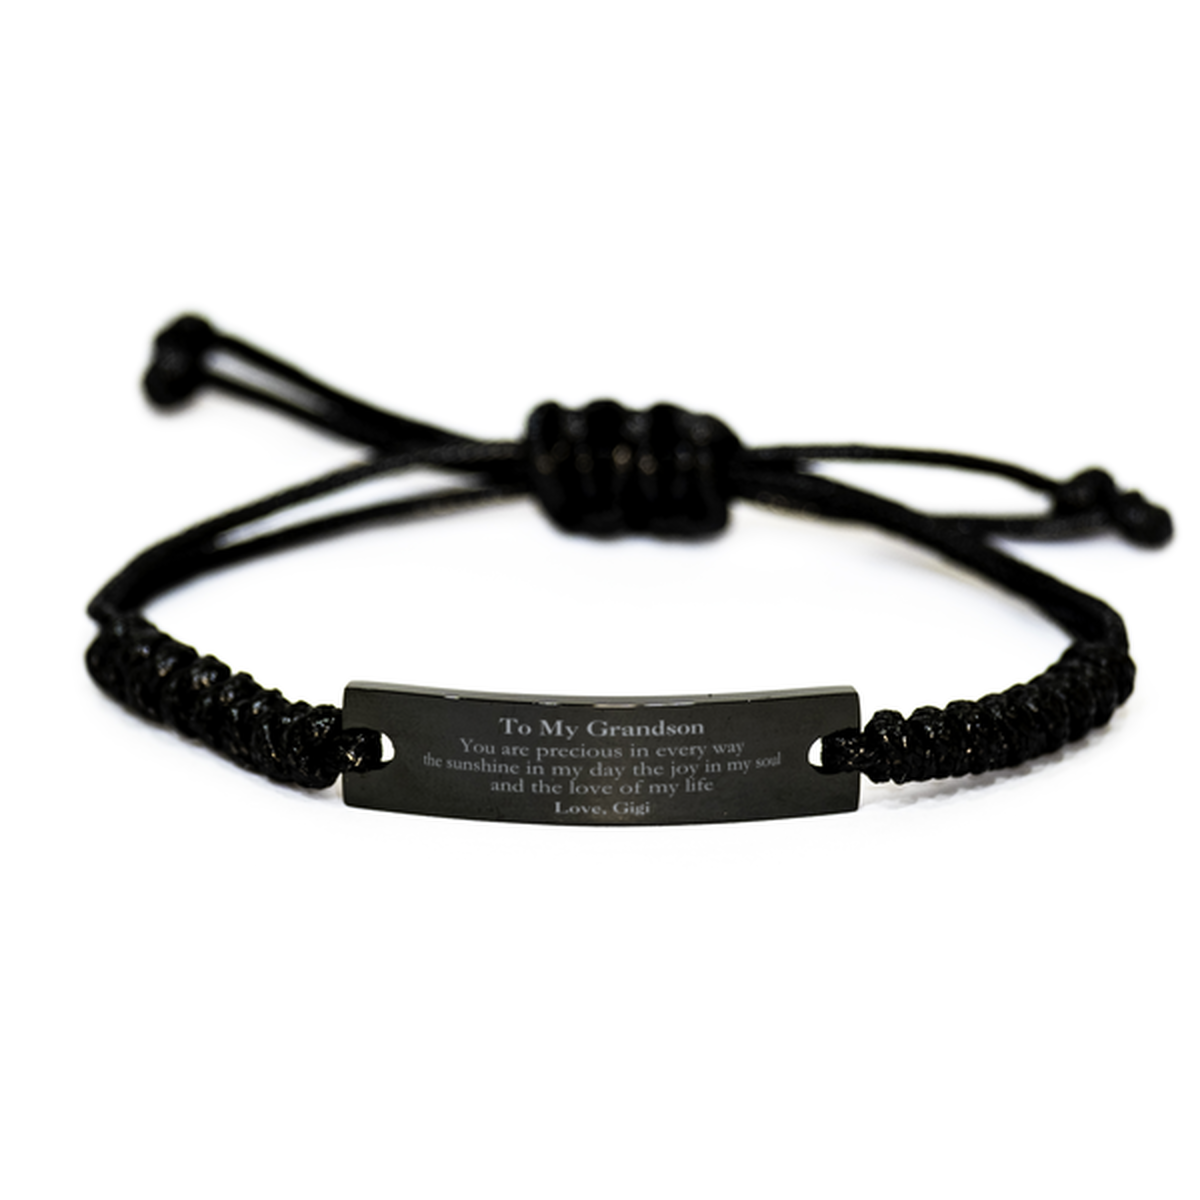 Graduation Gifts for Grandson Black Rope Bracelet Present from Gigi, Christmas Grandson Birthday Gifts Grandson You are precious in every way the sunshine in my day. Love, Gigi